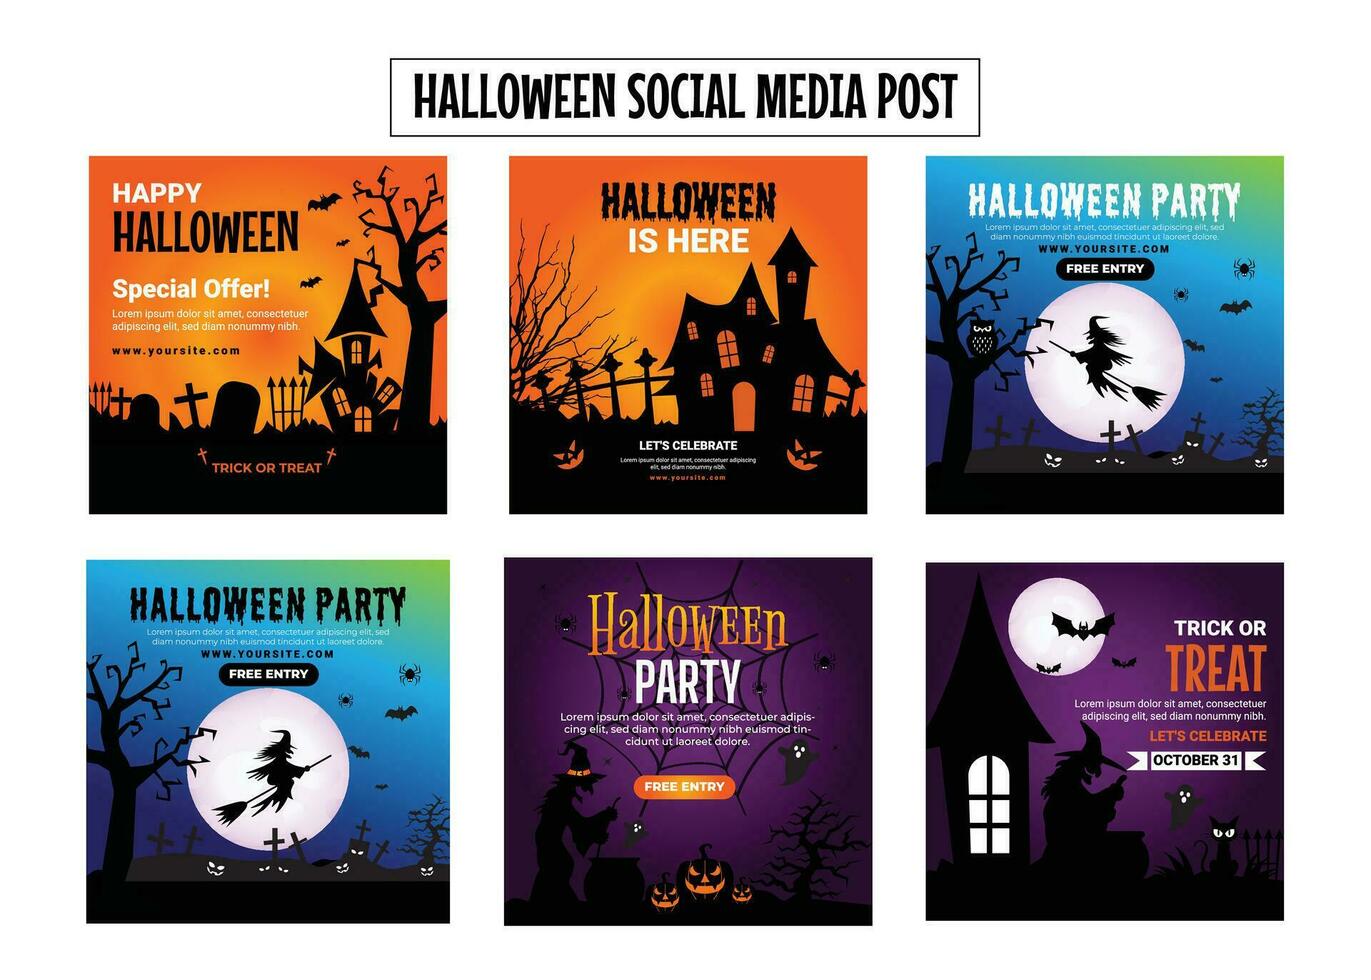 Free vector Halloween Social Media Banners Design, Halloween horror night party promotion social media banner template design. festival, holiday and celebration event marketing web post, flyer